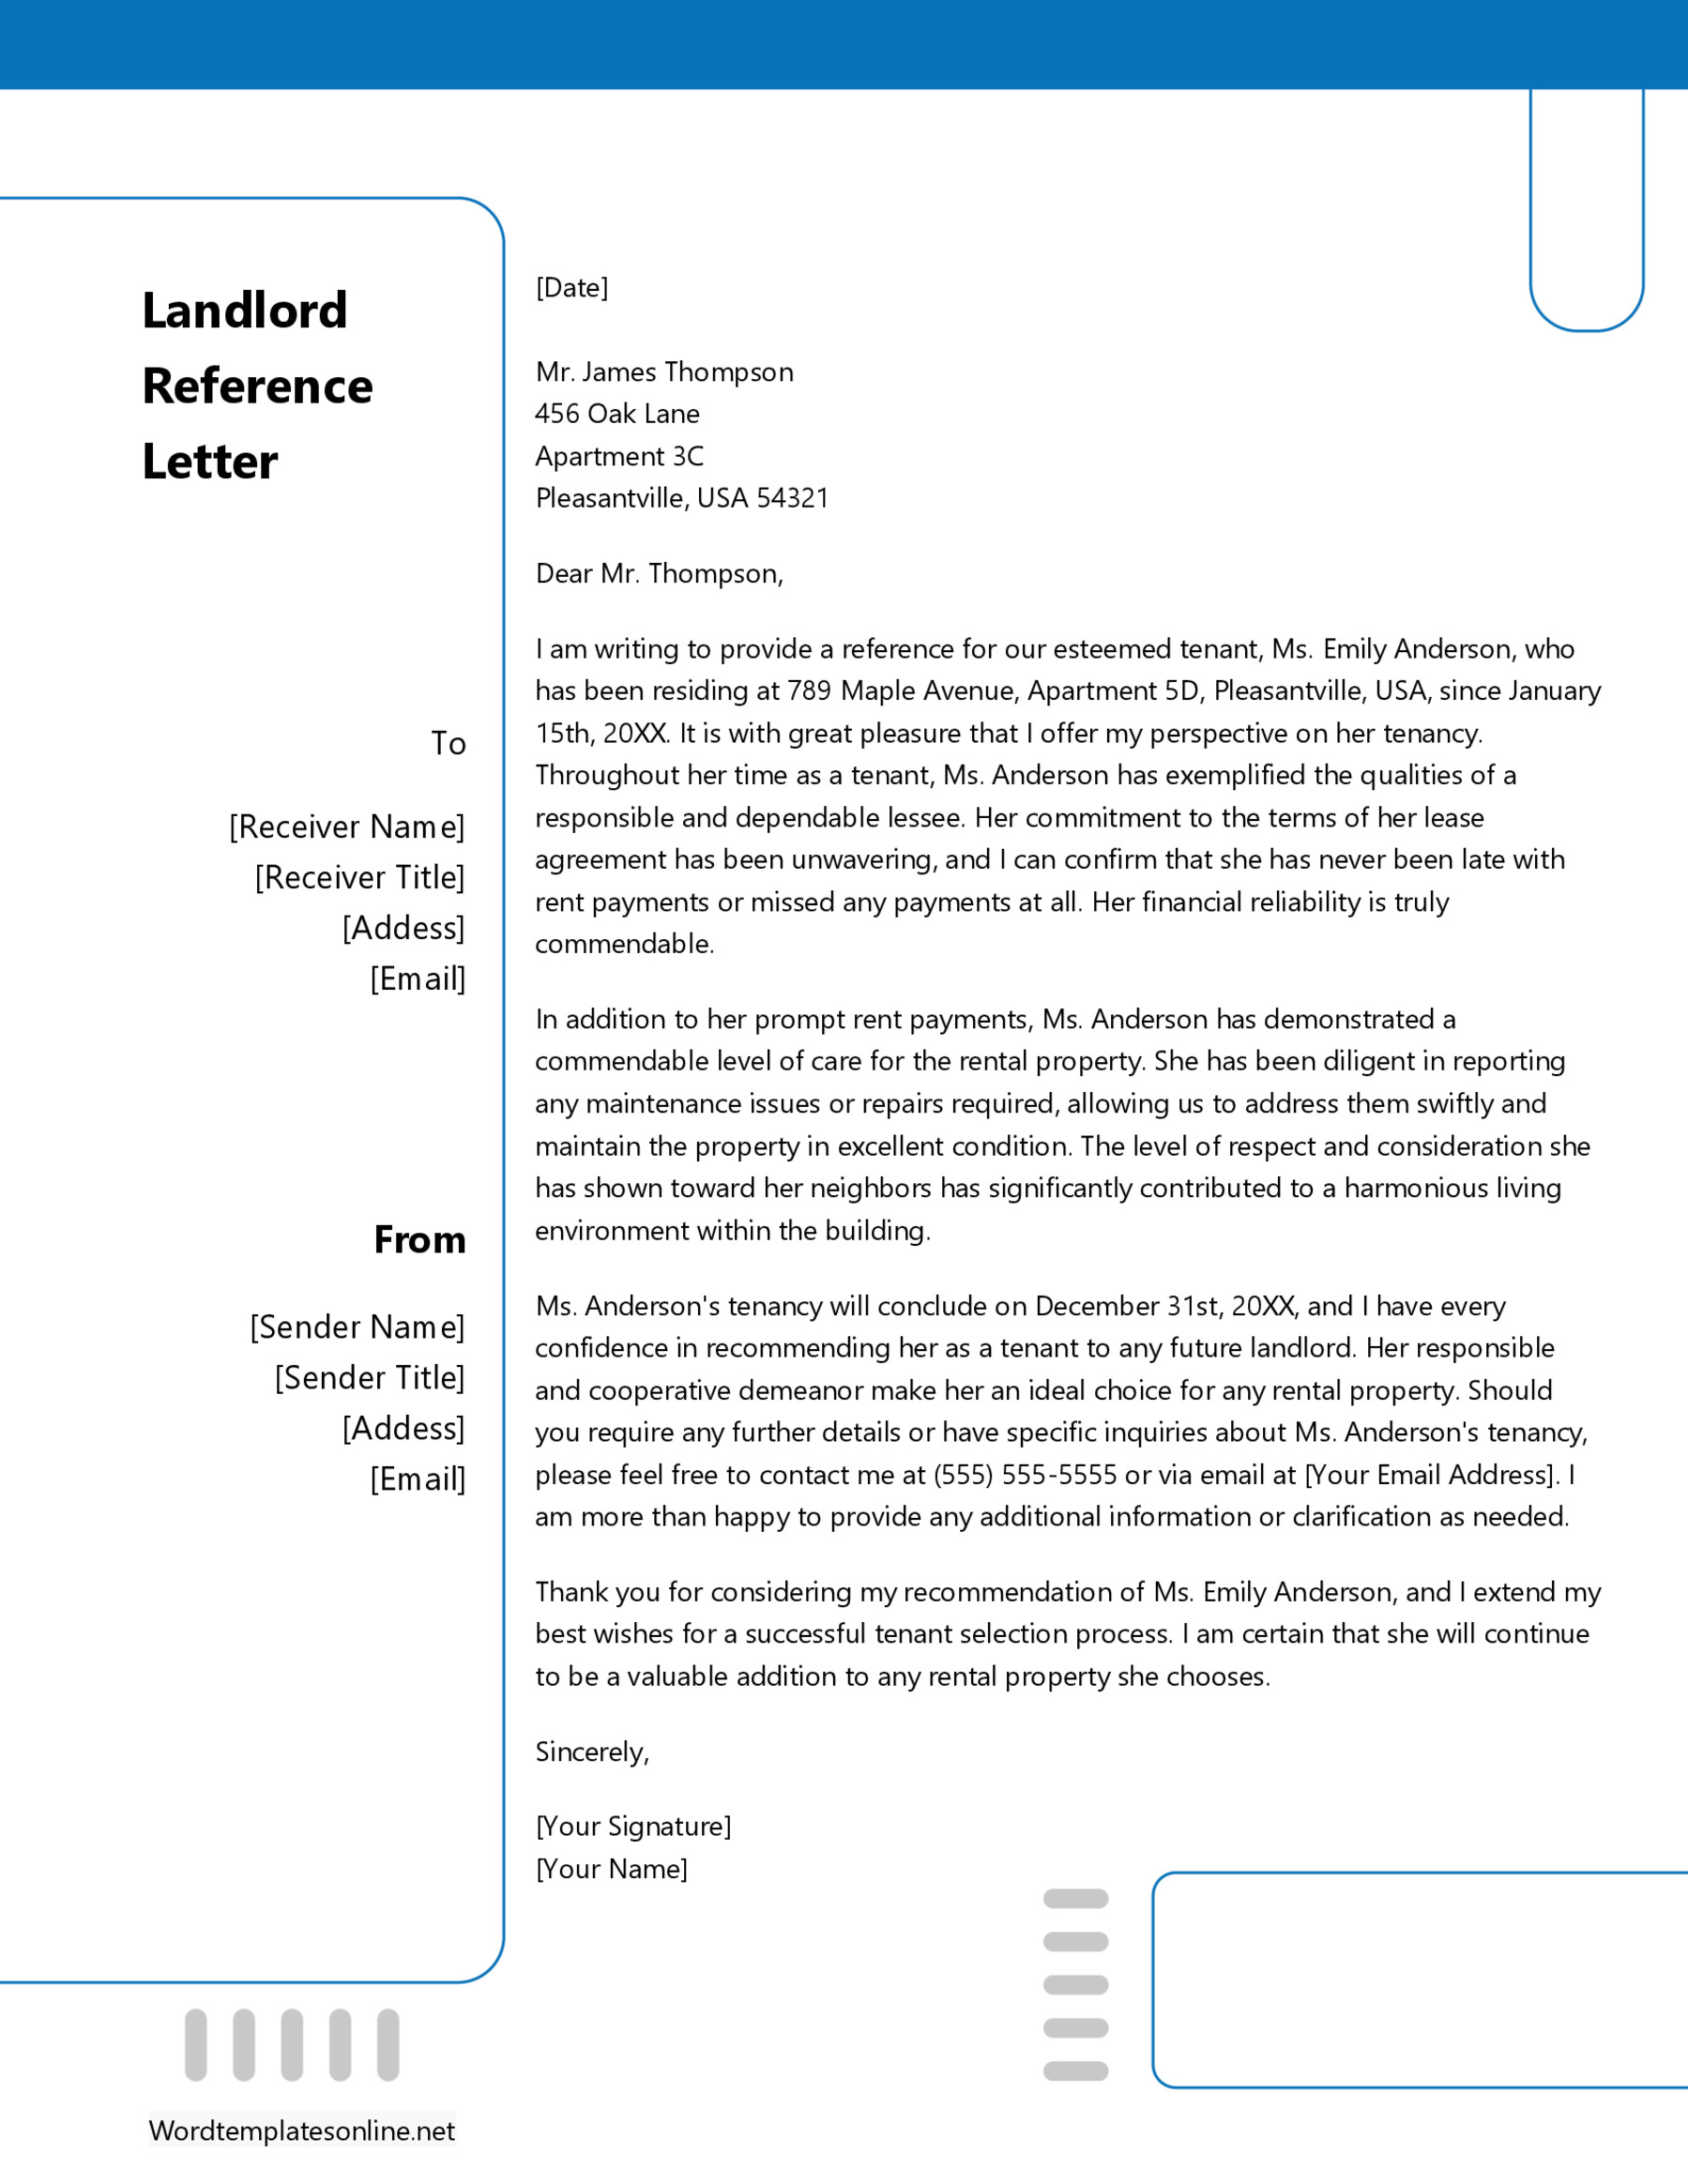 Sample Landlord Reference Letters For A Tenant